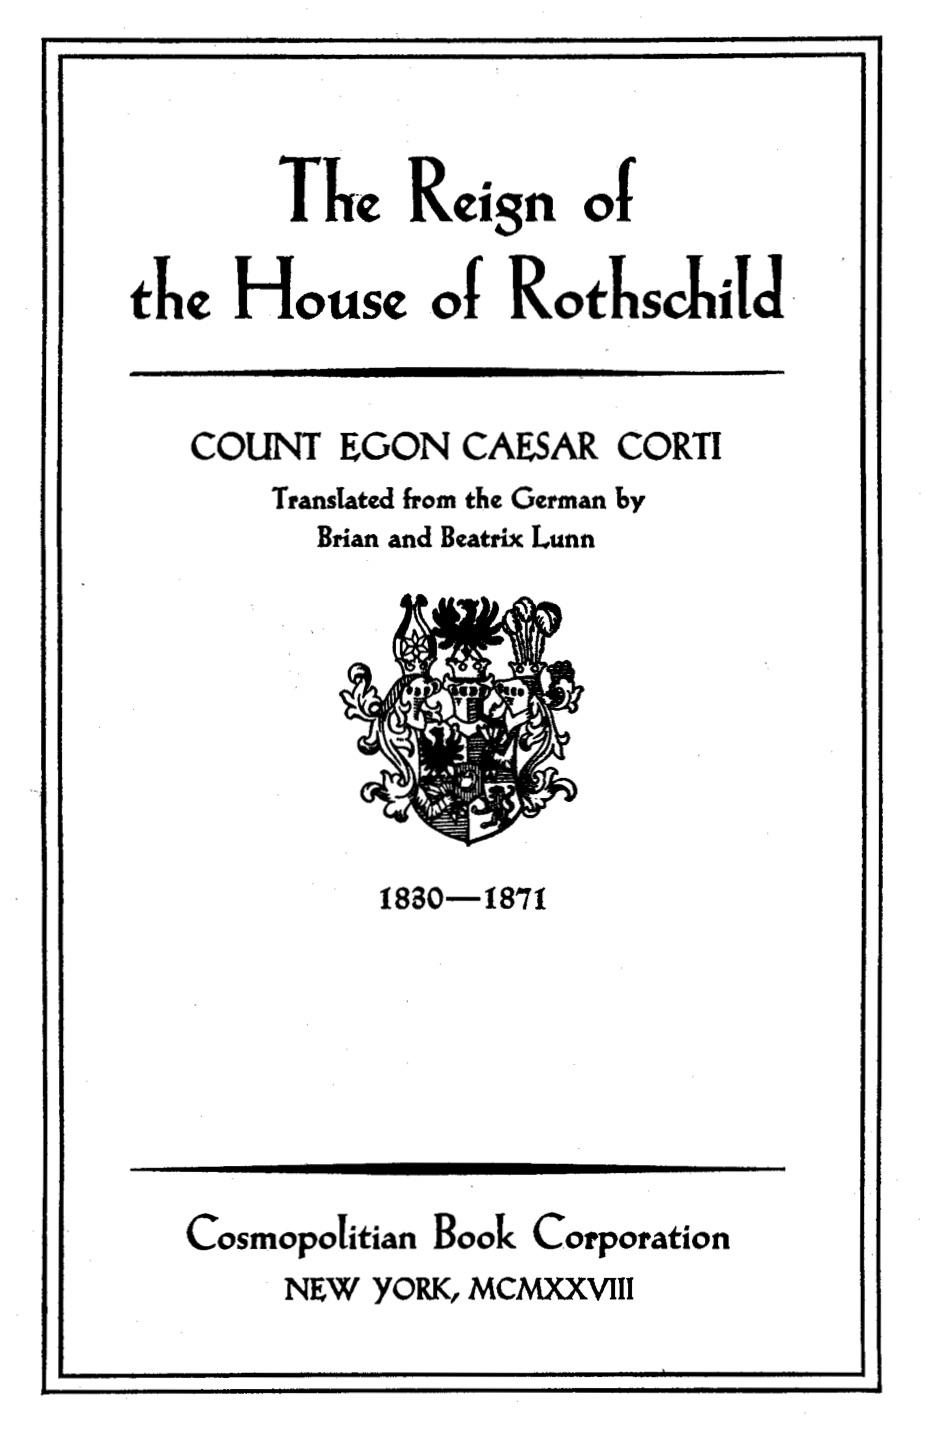 Reign of the House of Rothschild Translated From the German by Brian and Beatrix (1871) by Count Egon Caesar Corti